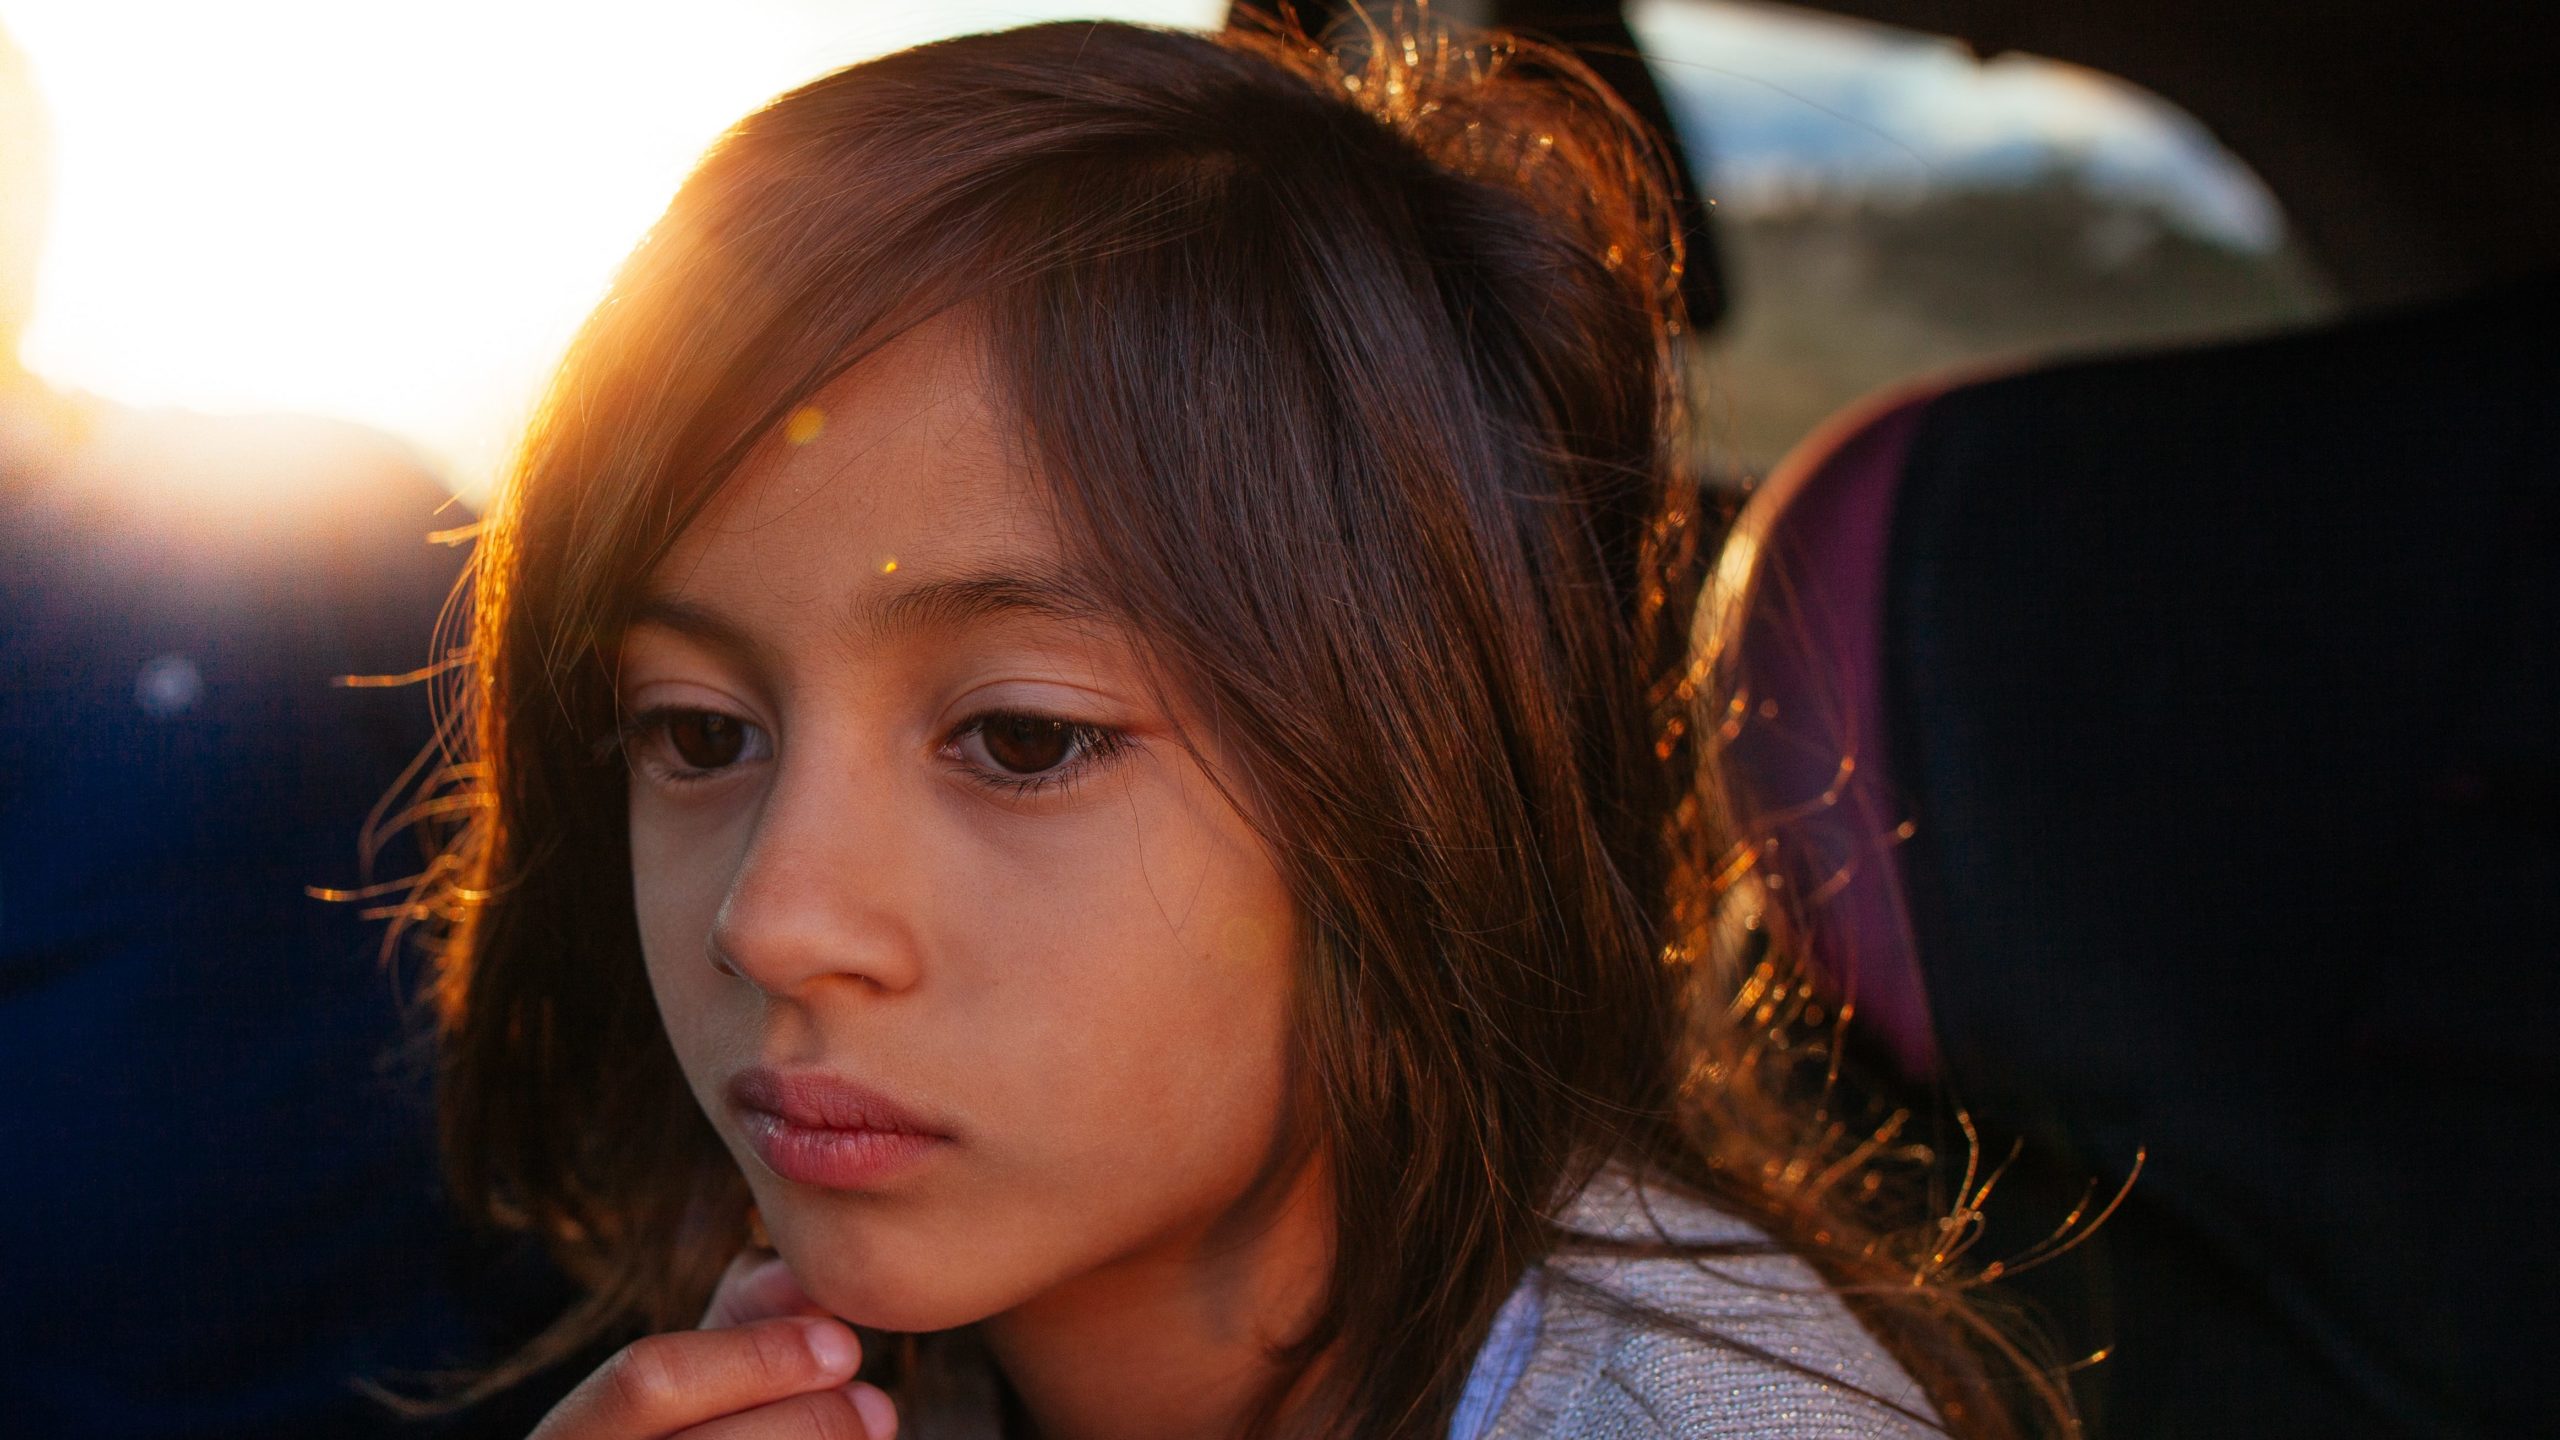 Childhood trauma and addiction go hand in hand. An image of a young girl looking into the distance. 